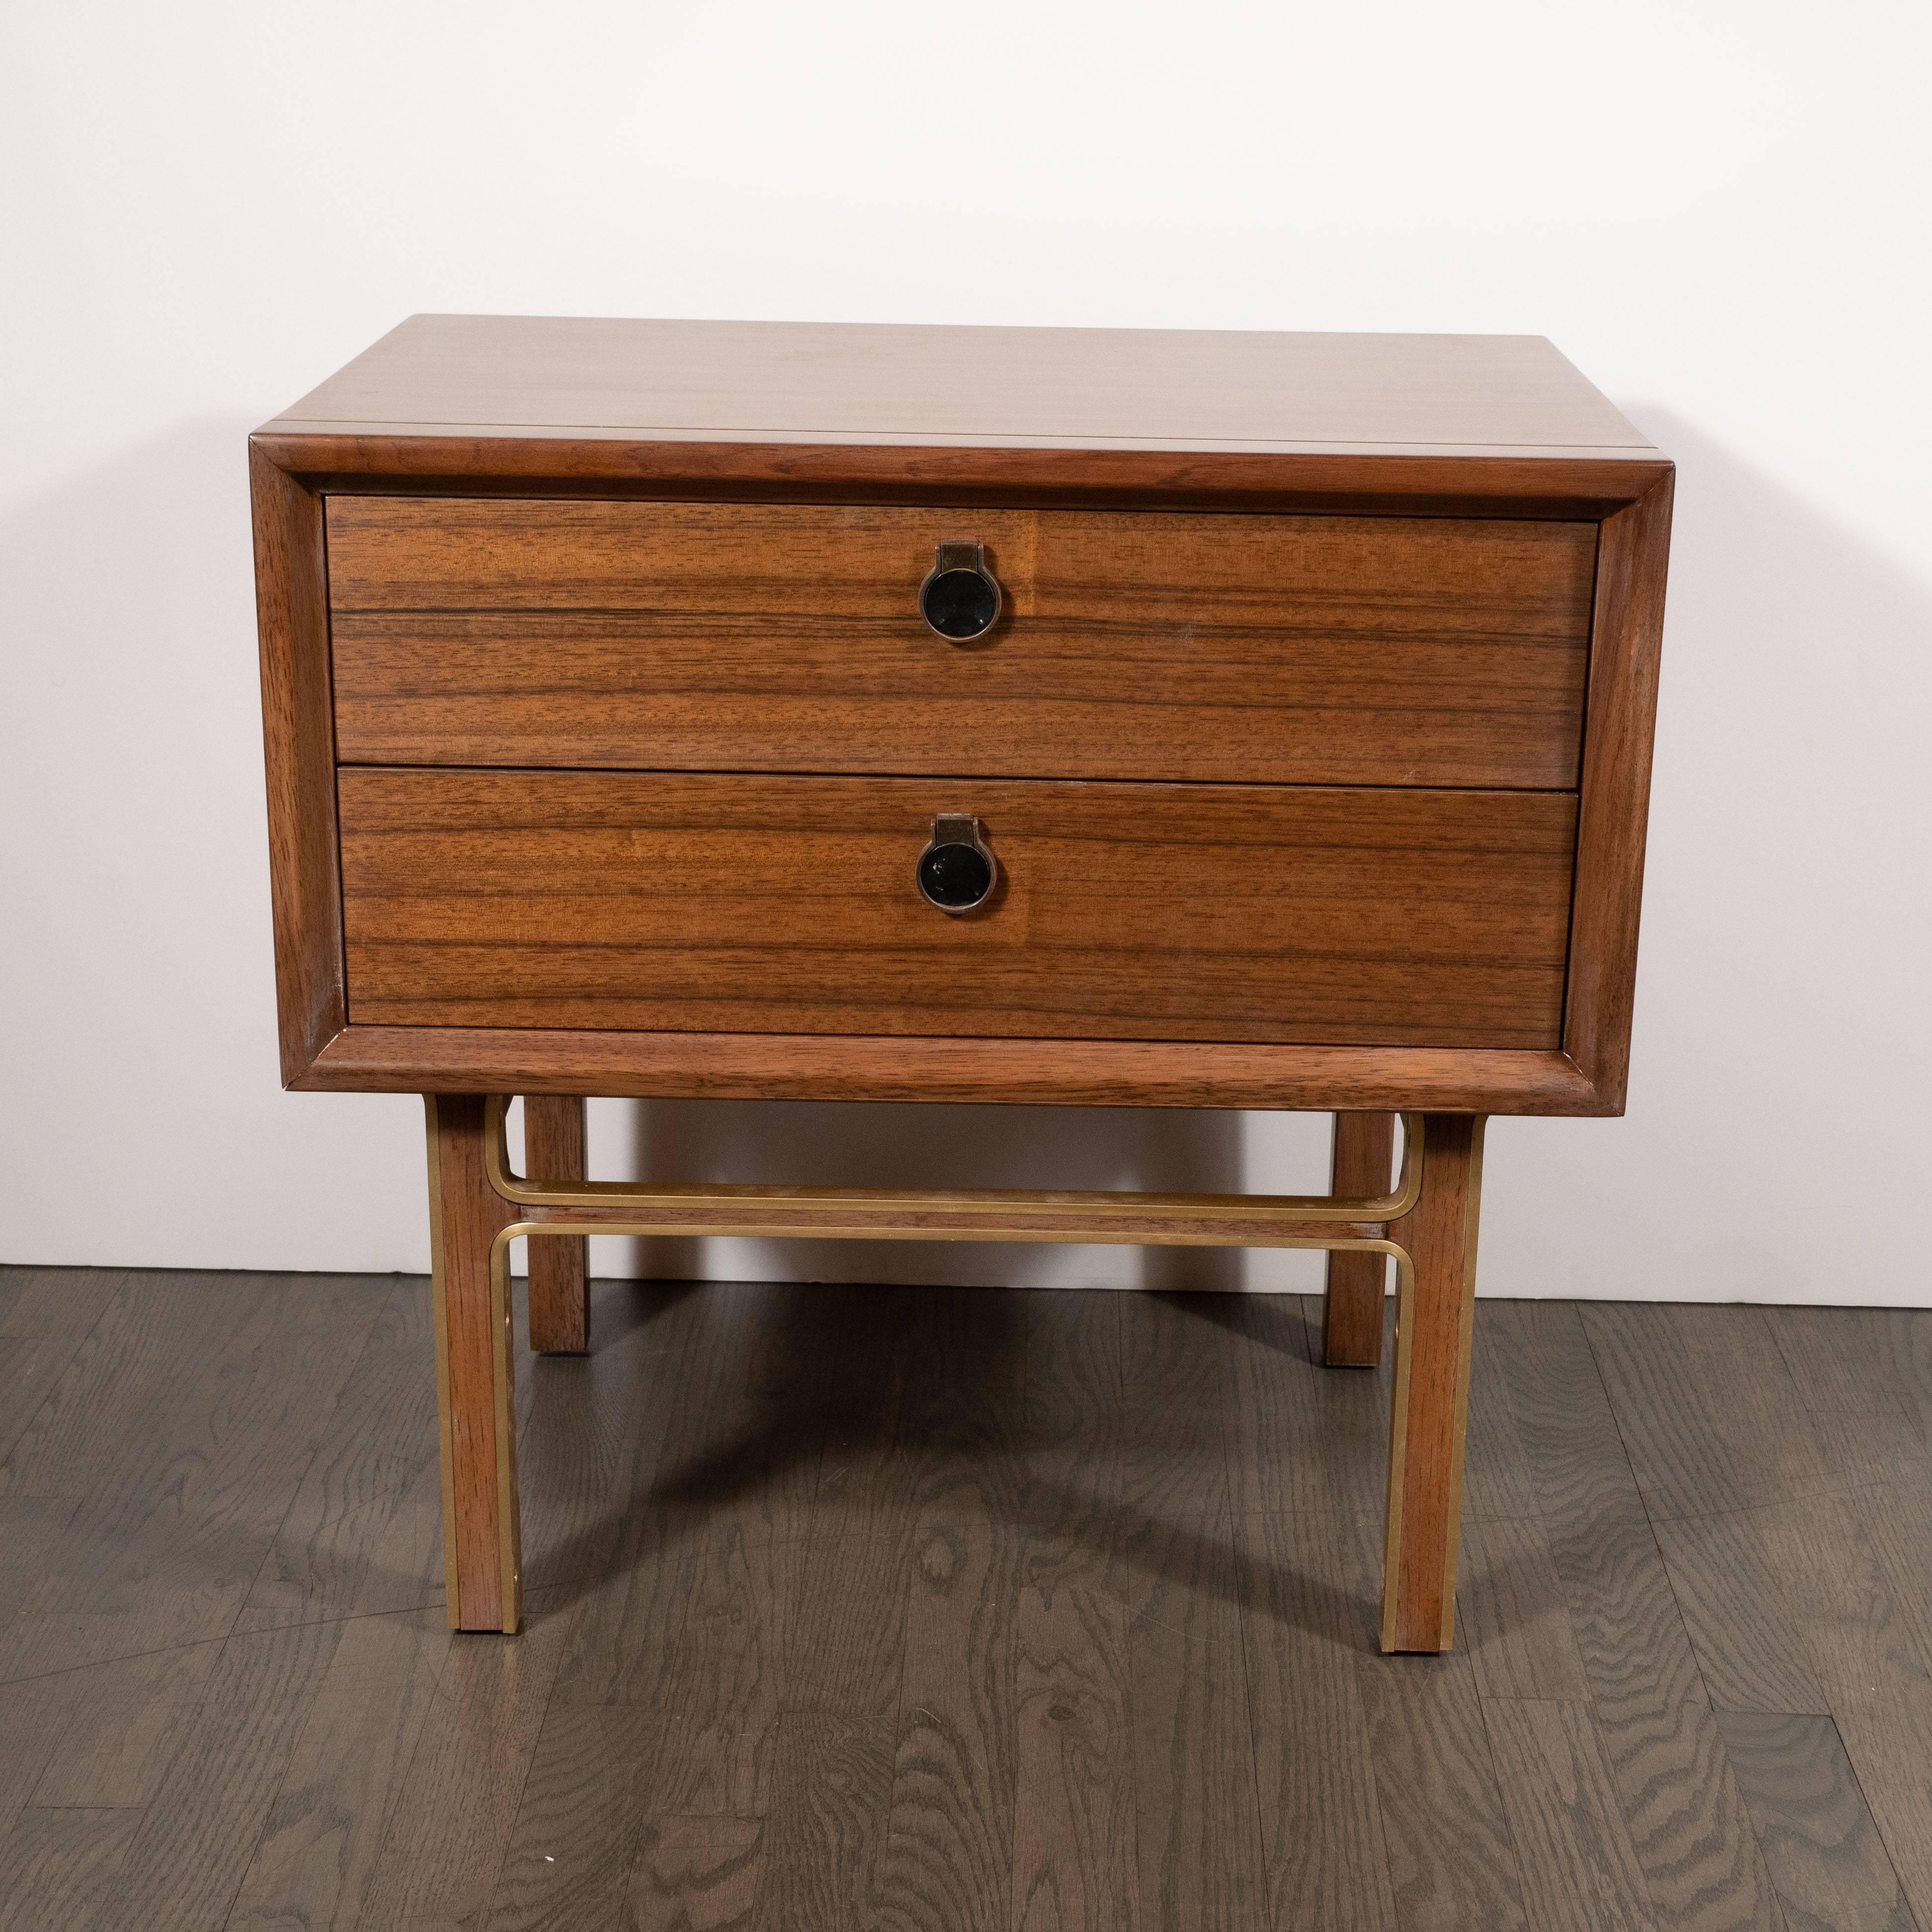 This refined and sophisticated pair of nightstands were realized in the United States, circa 1950. They feature rectangular bodies in book matched walnut with circular brass pulls. Additionally, they offer straight rectangular walnut legs wrapped in